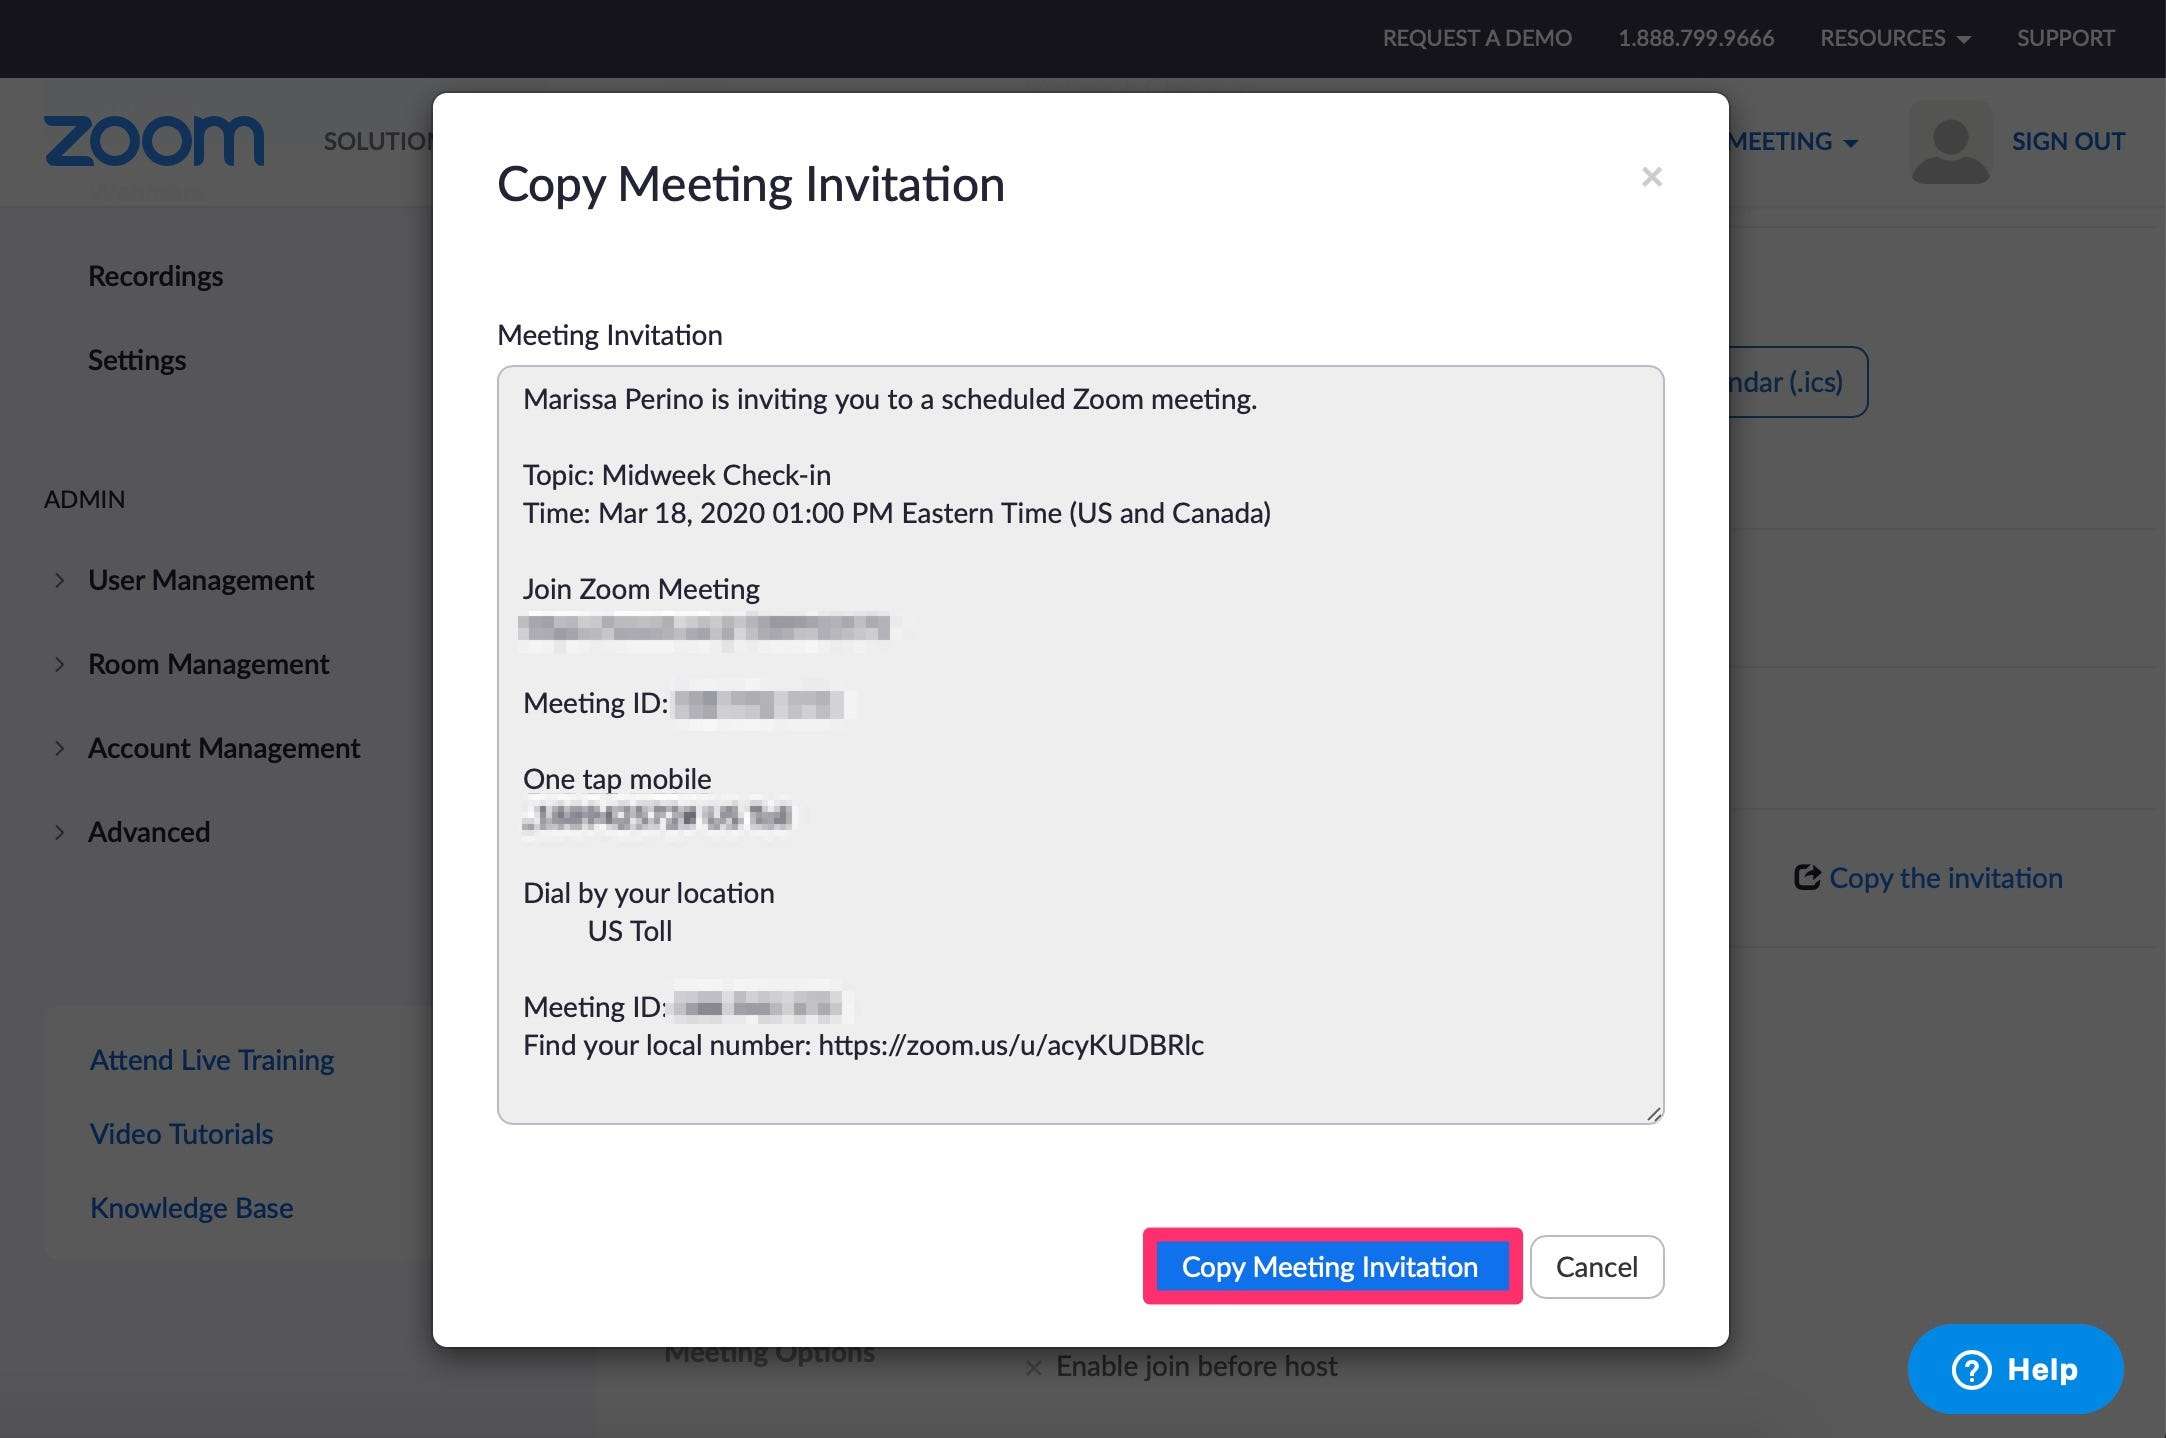 How to send a Zoom invite in 4 different ways, to set up group meetings